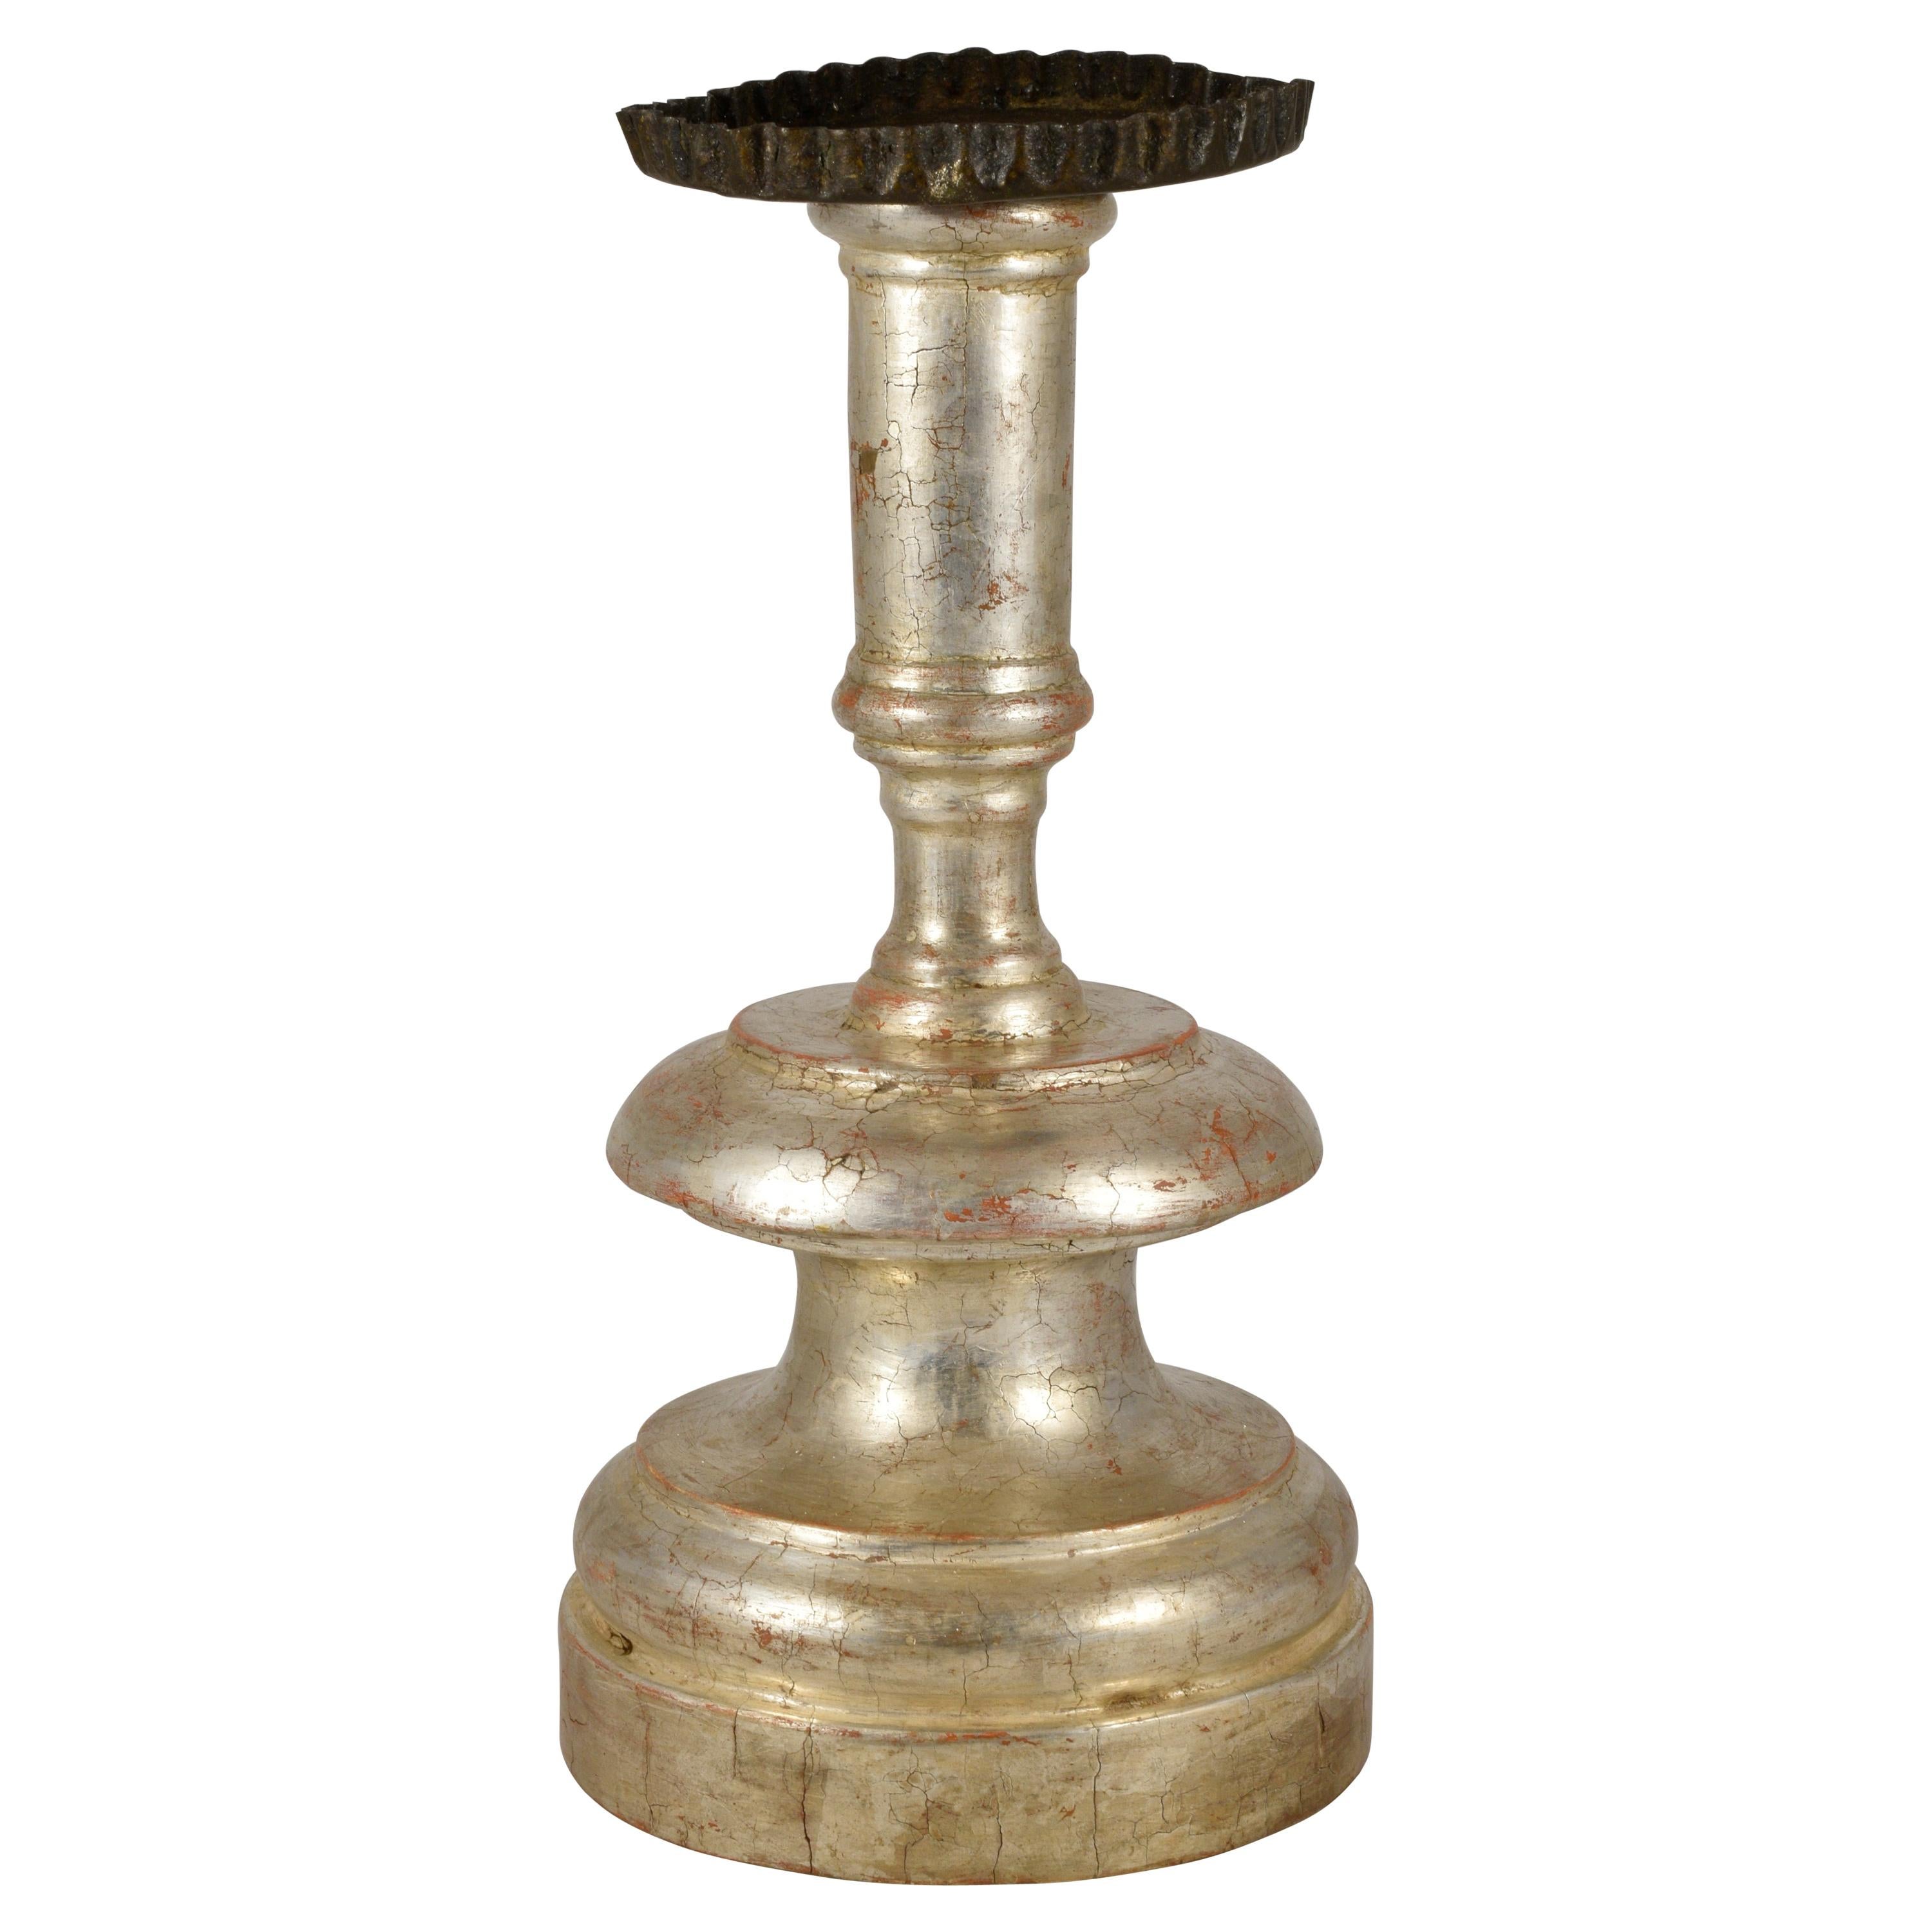 Florentine Candlestick in Lathed and Silvered Wood, Late 17th Century For Sale